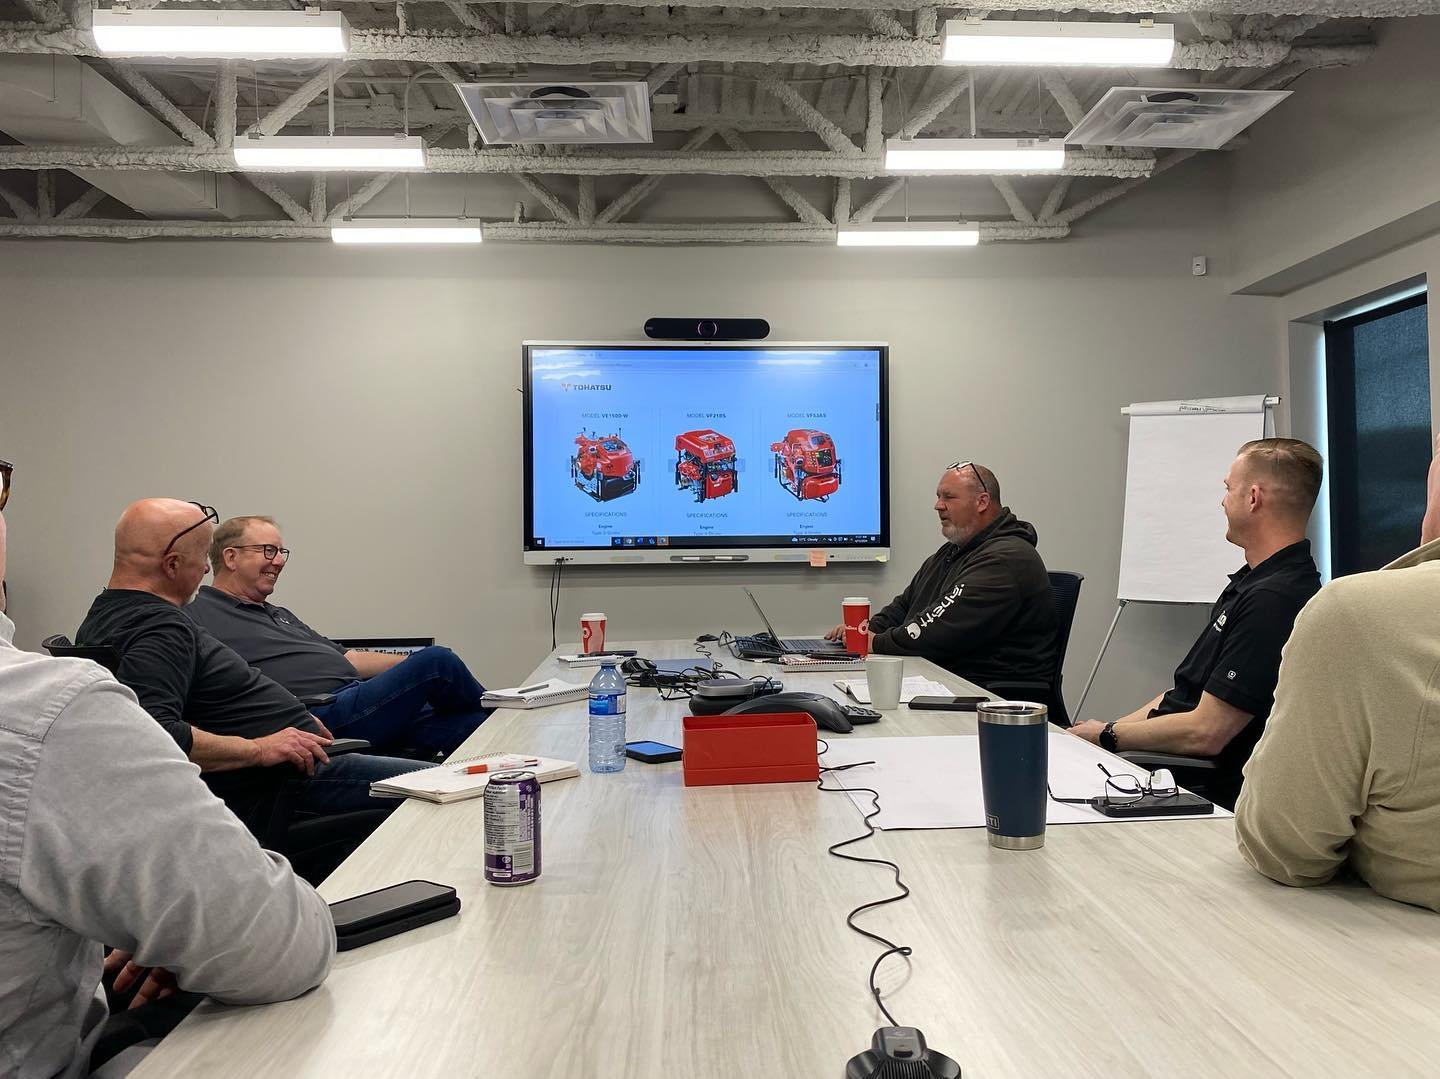 Delta BC&rsquo;s pump sales team are very busy today with both classroom and on the water Tohatsu Fire Pump training in preparation for another tough wildfire season.

#tohatsufirepumps #bcwildfire #bcws #deltawildfire #maplemarineservices #deltawate